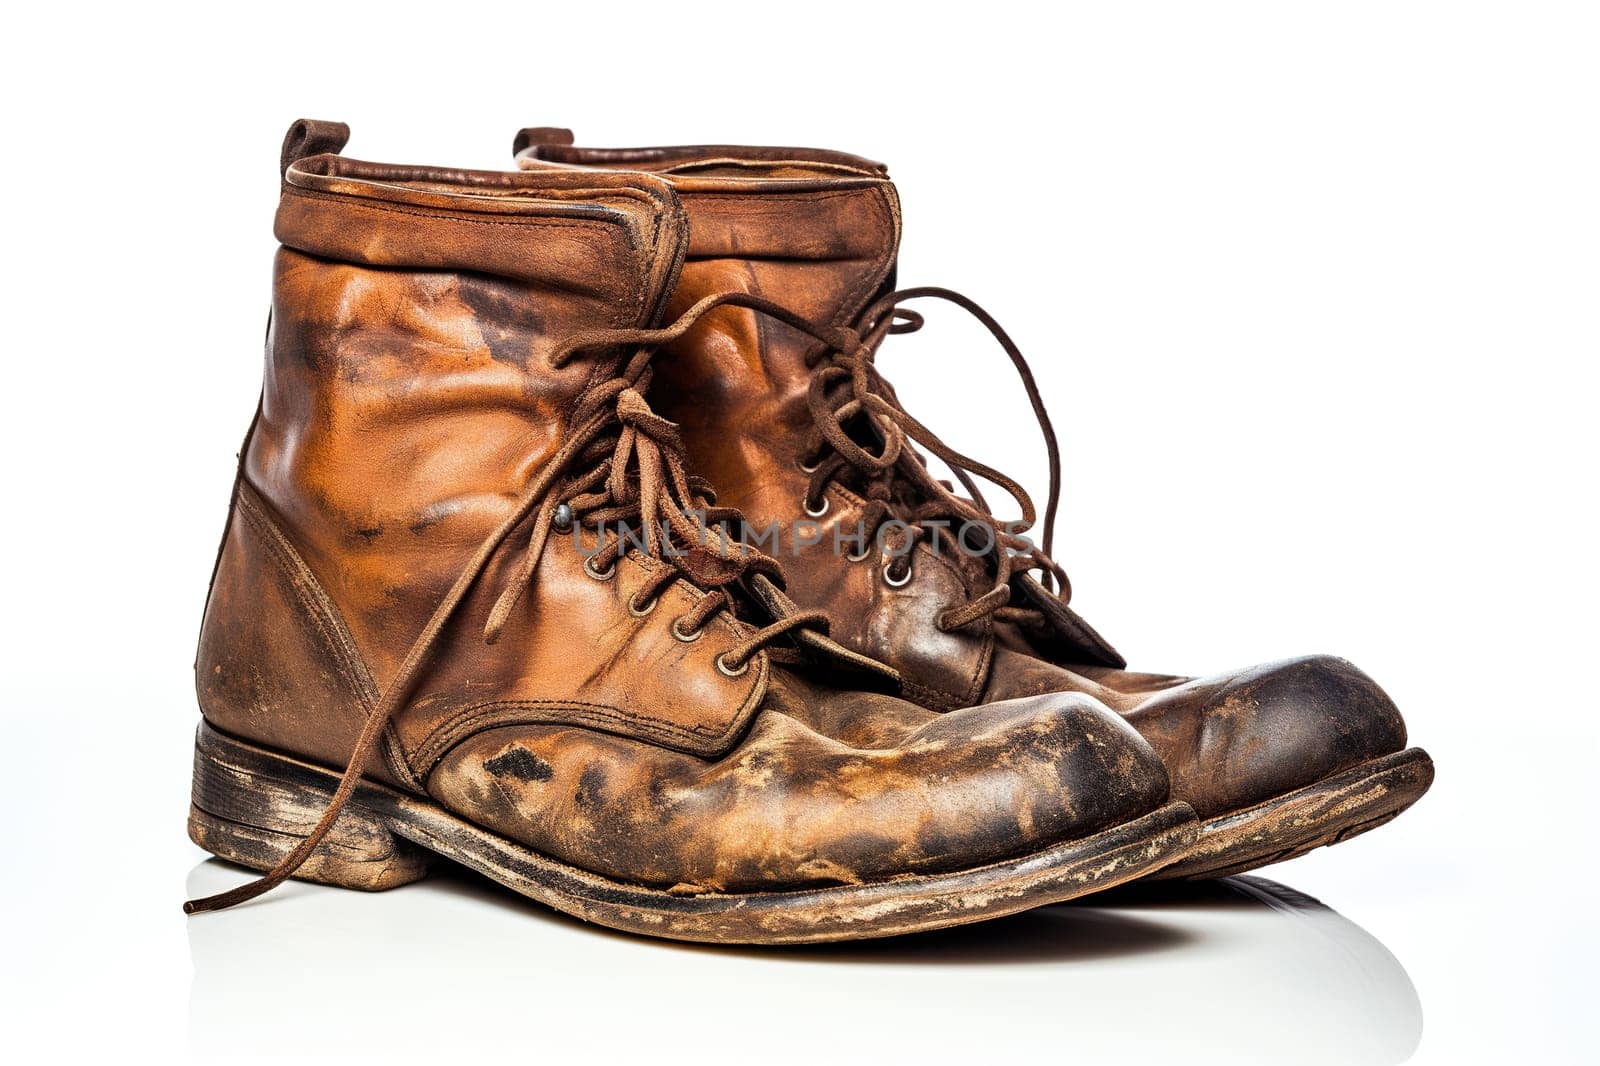 Old worn men's shoes isolated on a white background. Generated by artificial intelligence by Vovmar